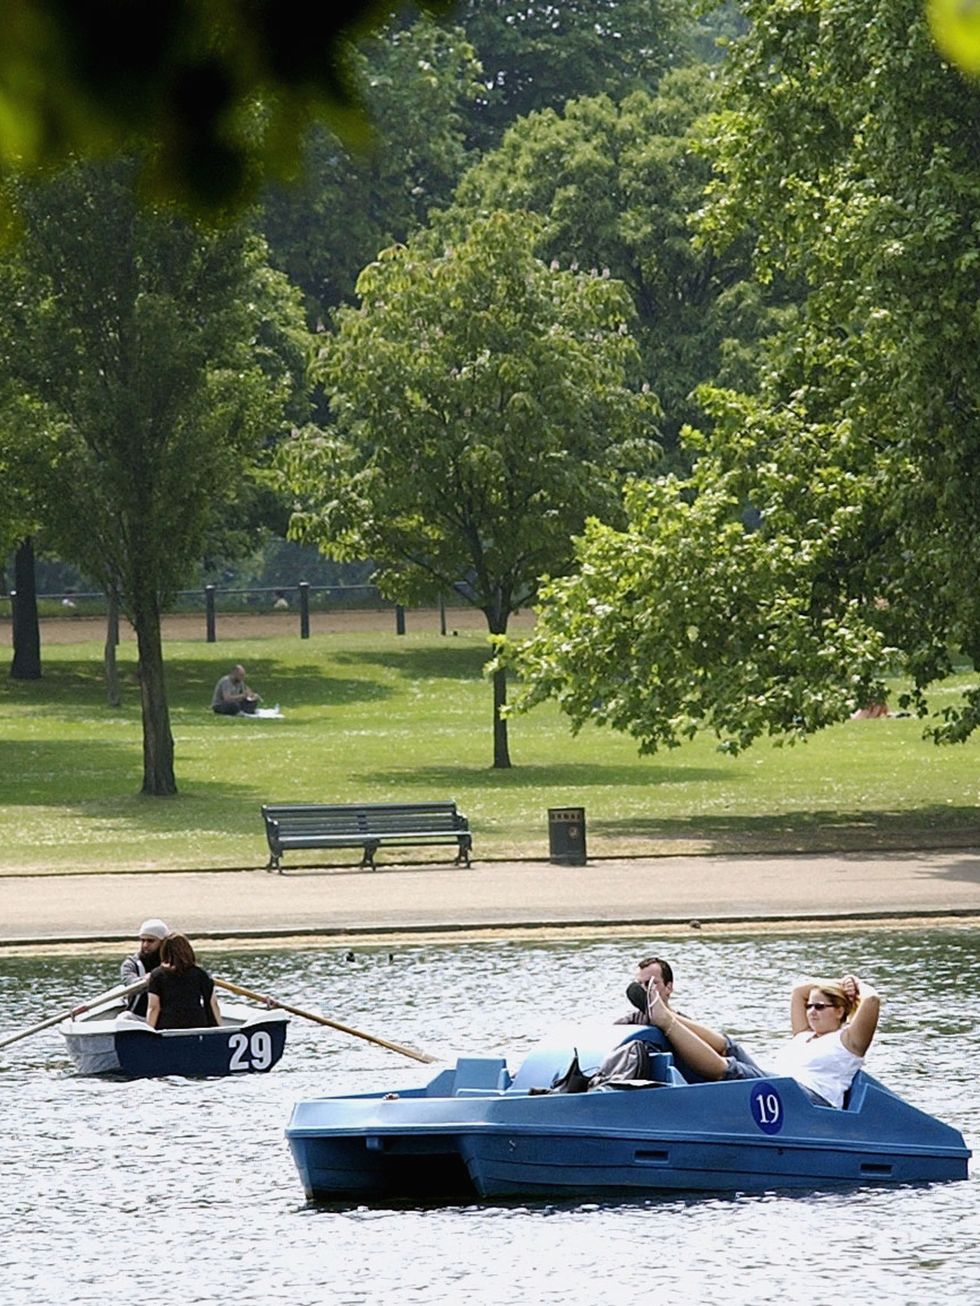 Maybe Brangelina will share a romantic Sunday afternoon on a pedalo in Hyde Park